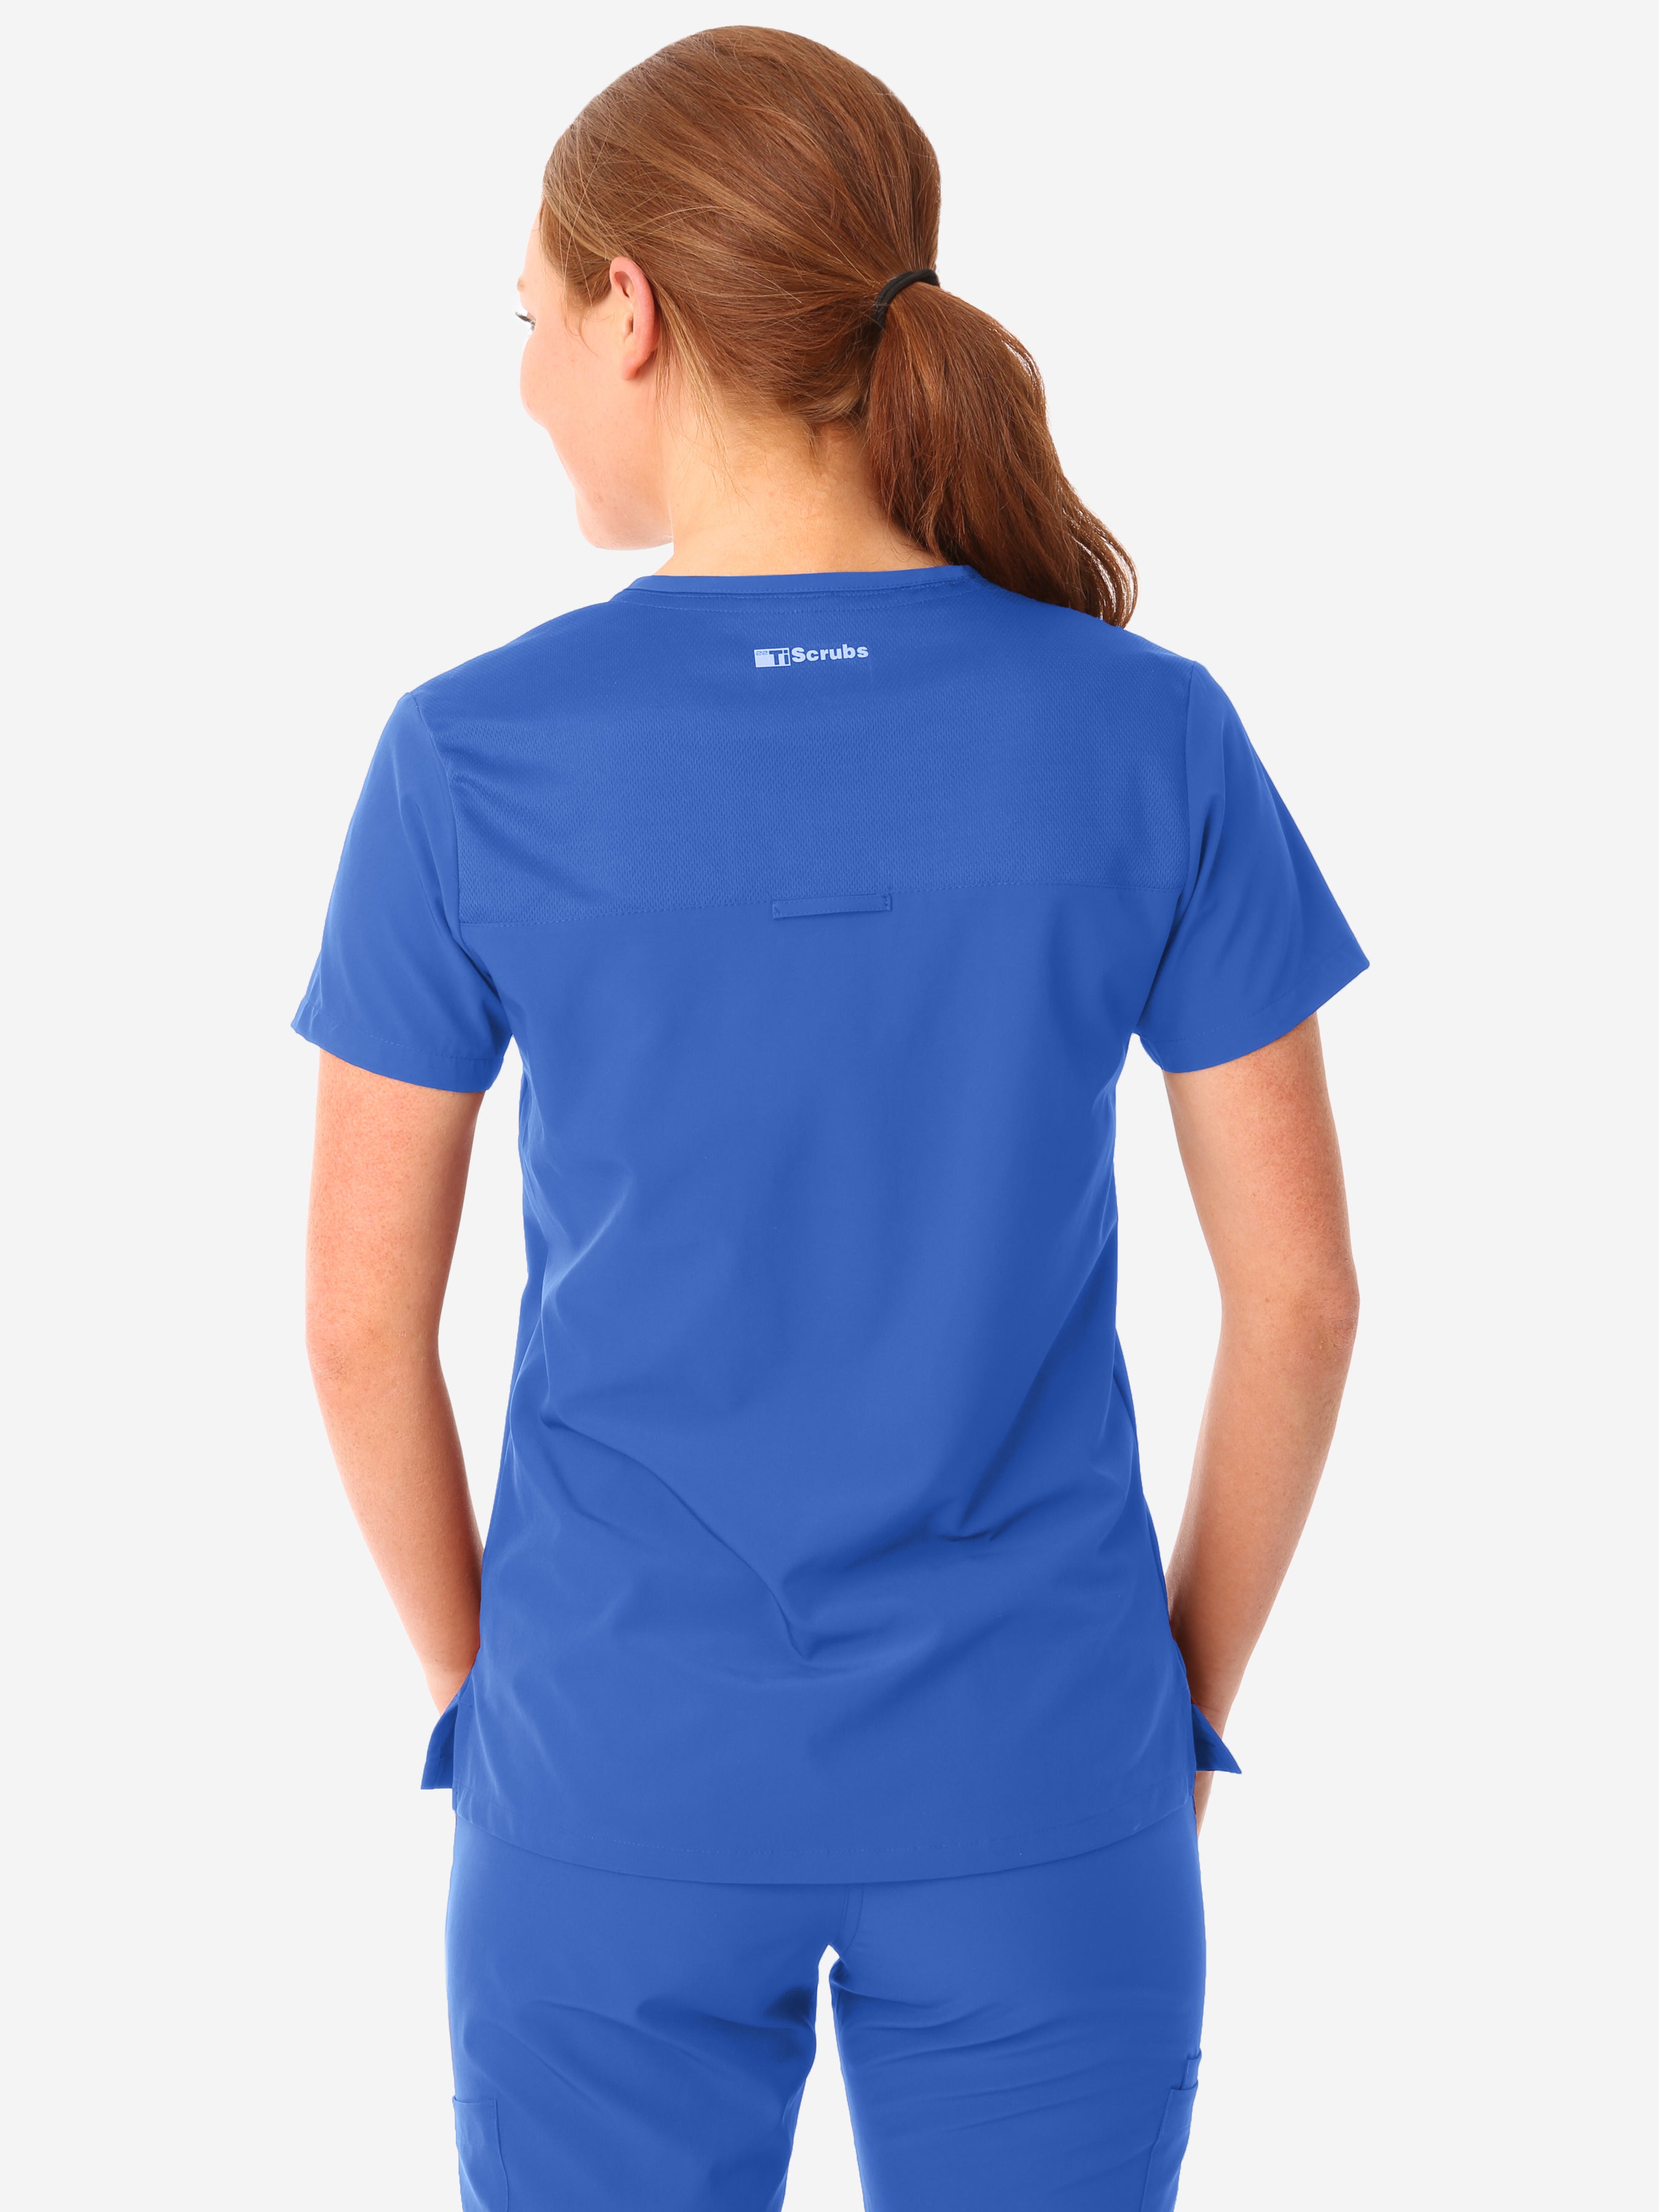 TiScrubs Women's Stretch Royal Blue One-Pocket Scrub Top Untucked Back View Top Only